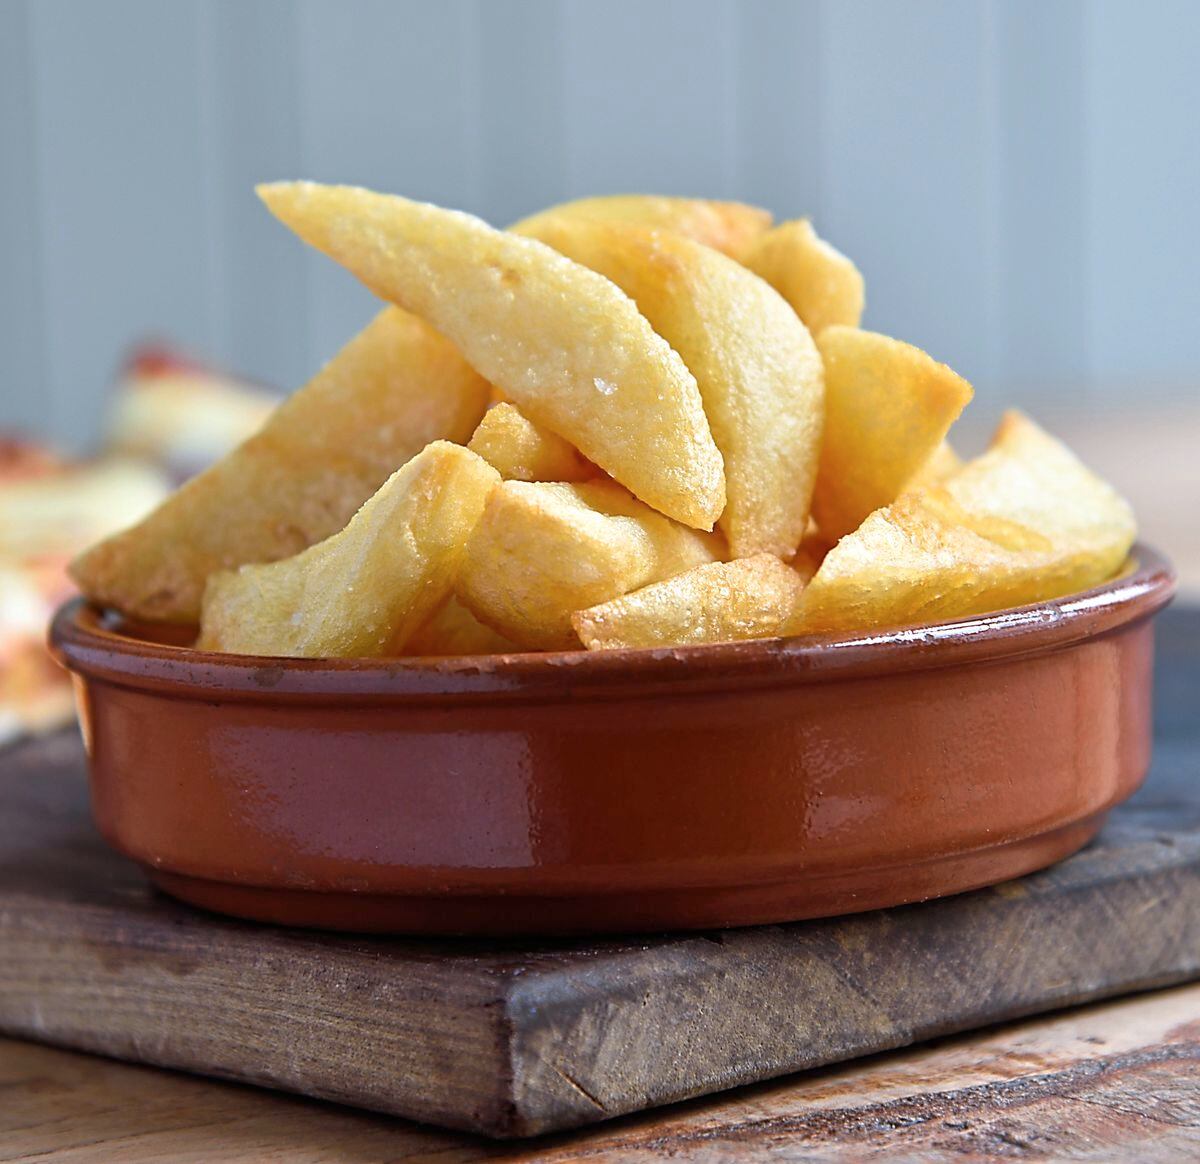 All fries – triple cooked chips